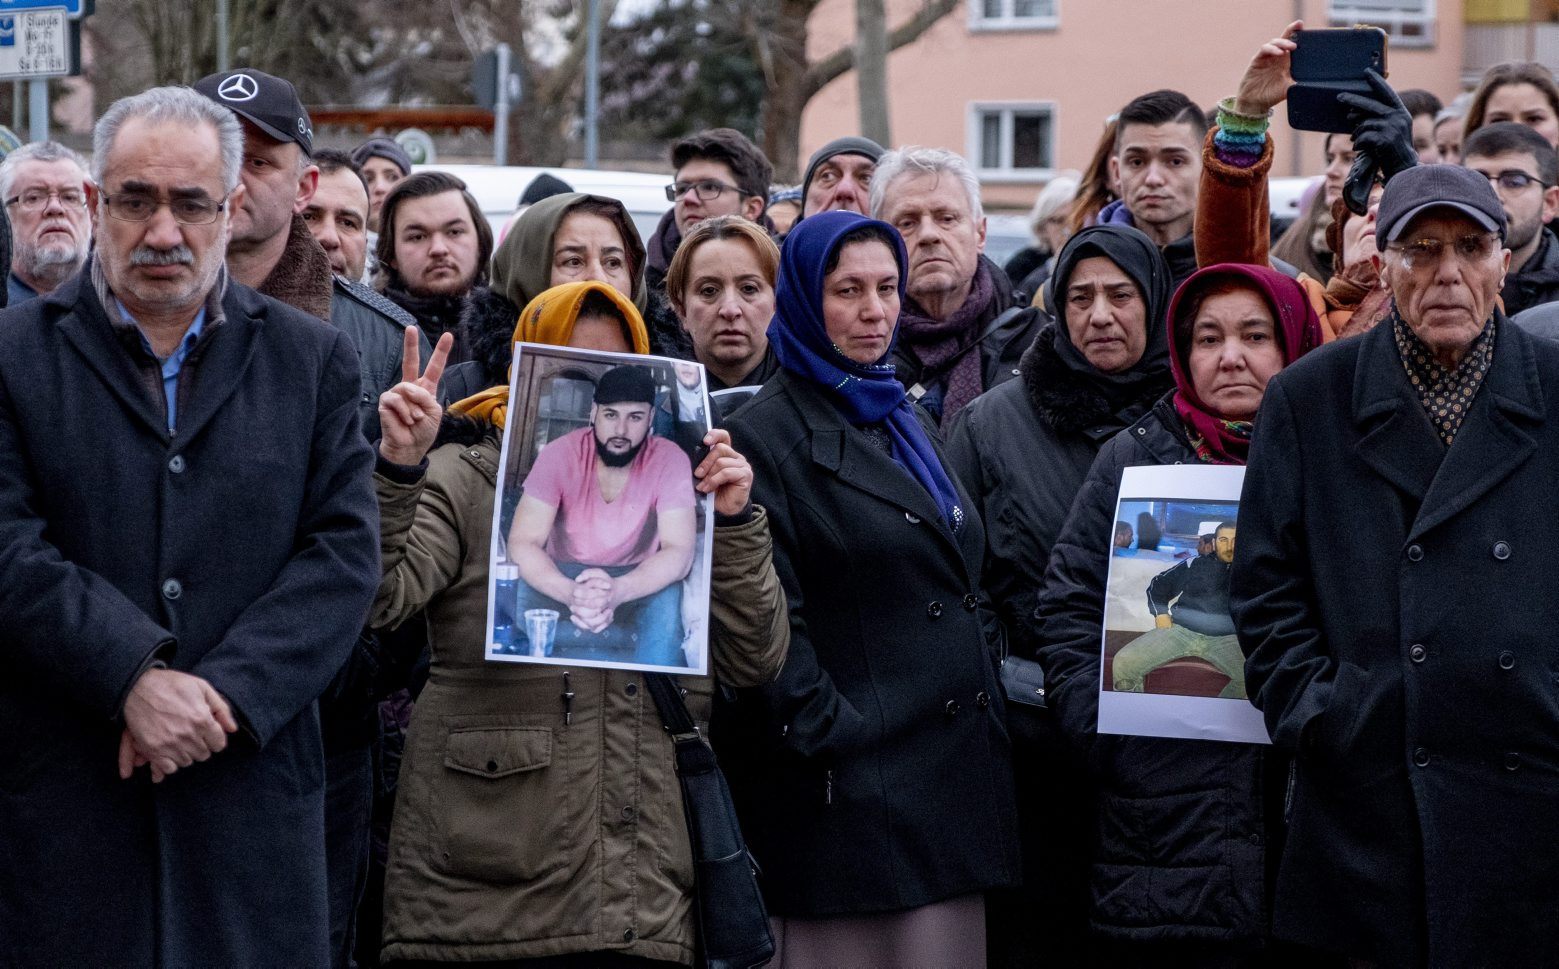 People hold photos of their friends, victims of a shooting in Hanau, Germany, on Friday, Feb. 21, 2020. A 43-year-old German man shot dead nine people of immigrant backgrounds in the Frankfurt suburb of Hanau on Wednesday night before killing his mother and himself. He left a number of rambling texts and videos espousing racist views. (AP Photo/Michael Probst) Germany Shooting